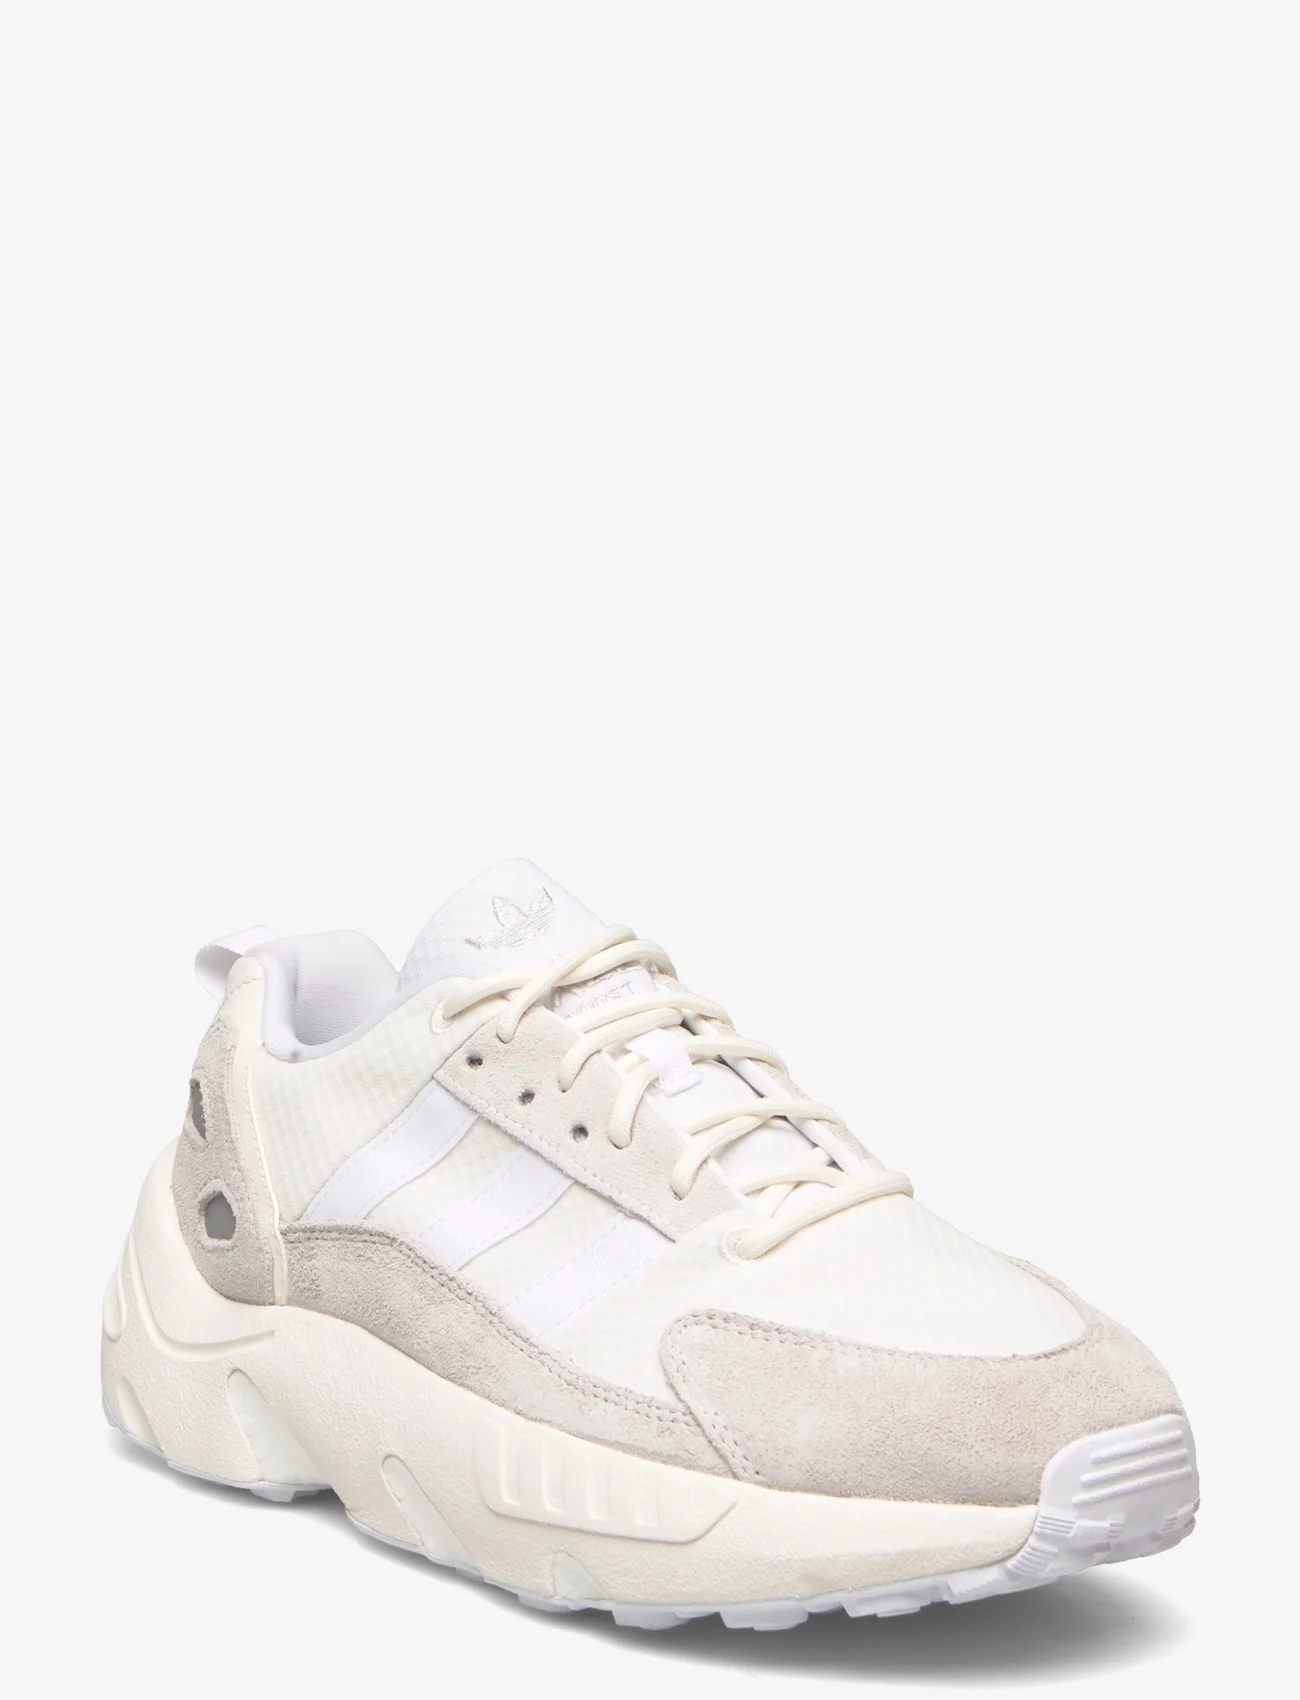 adidas Originals - ZX 22 BOOST Shoes - chunky sneakers - ftwwht/ftwwht/clowhi - 0